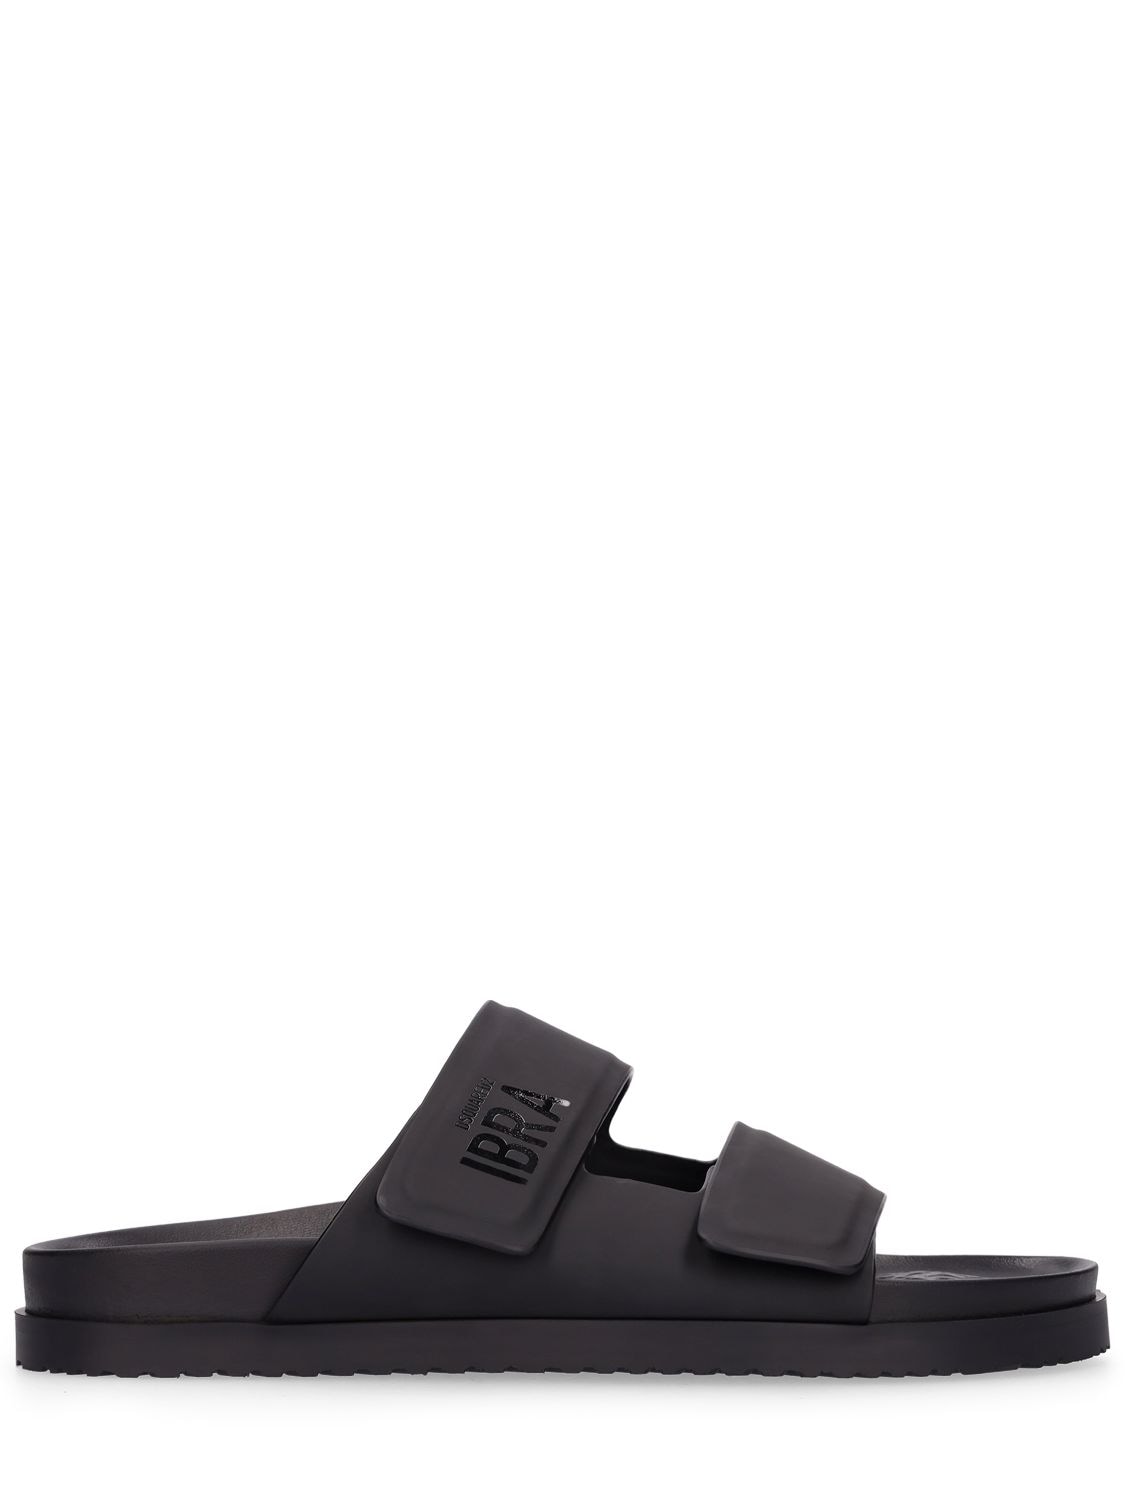 DSQUARED2 IBRA RUBBERIZED LEATHER SANDALS